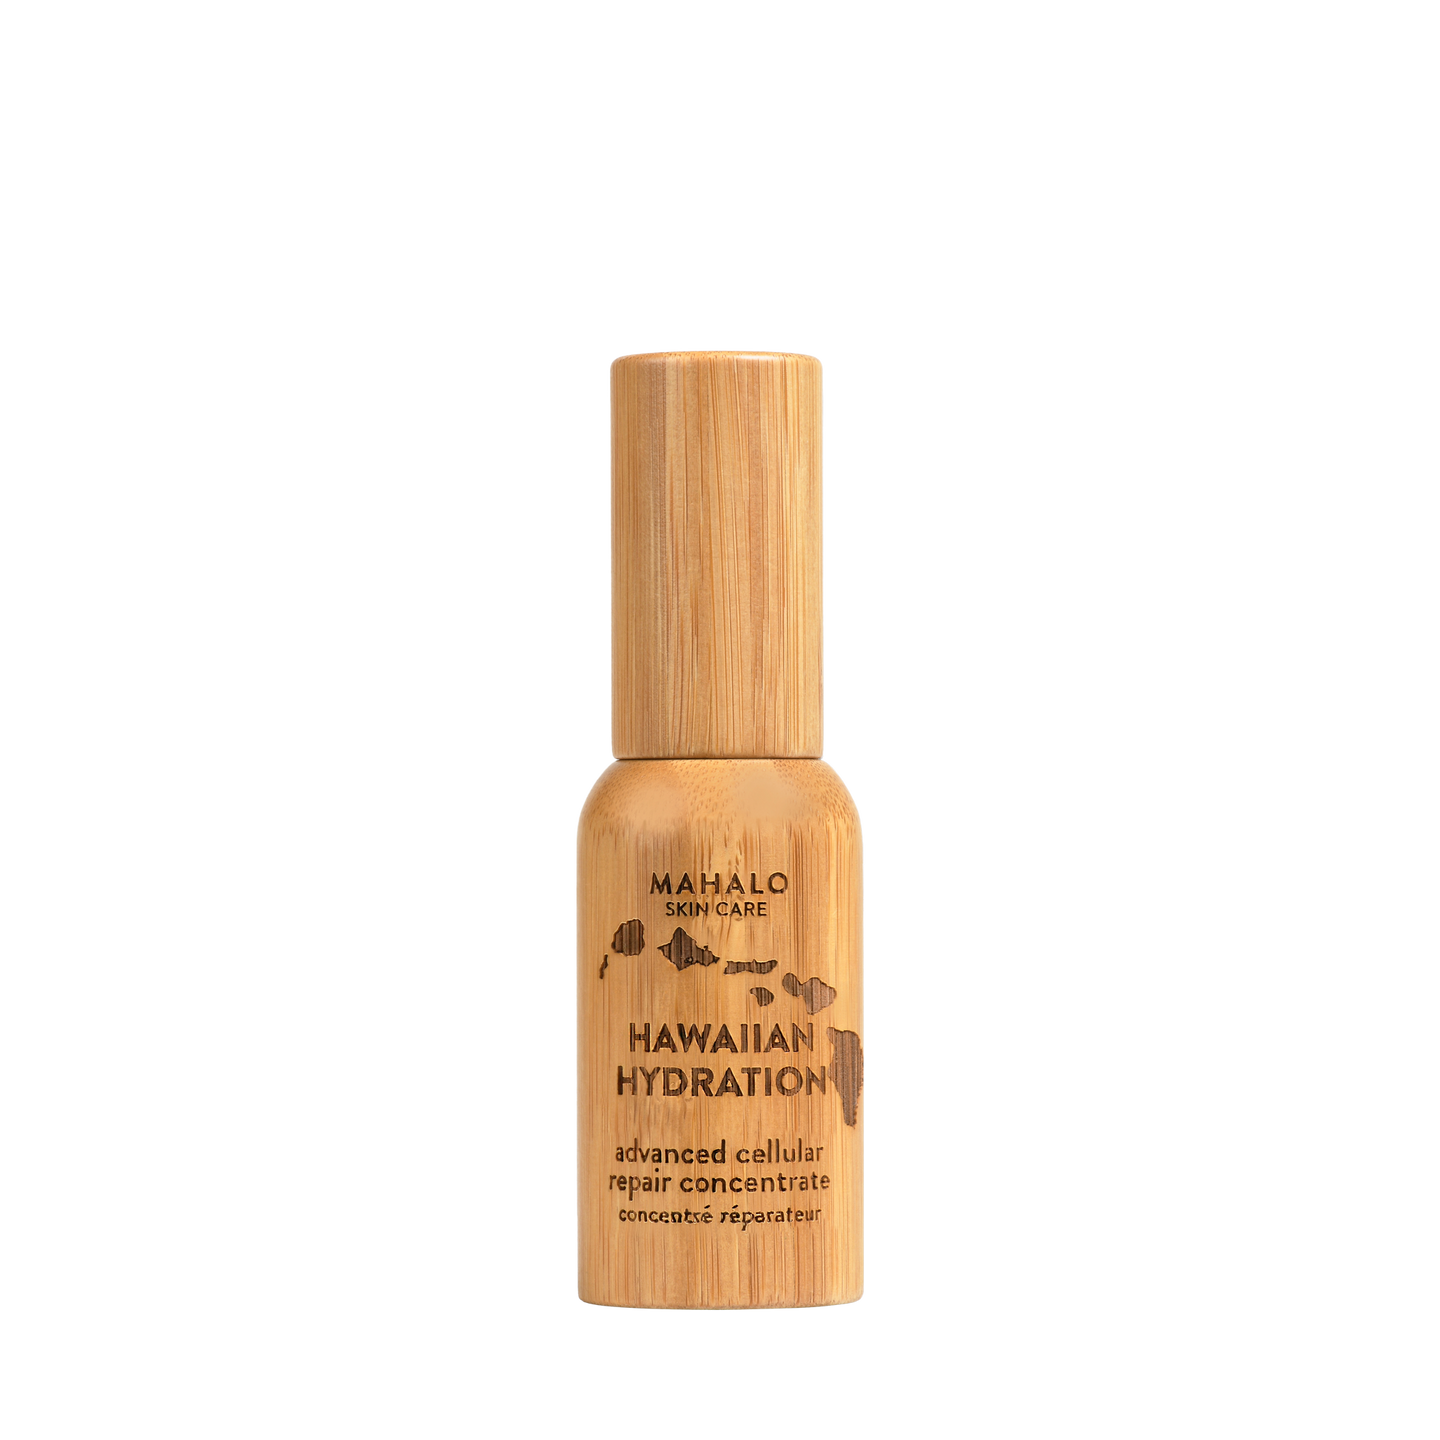 The HAWAIIAN HYDRATION advanced cellular repair concentrate